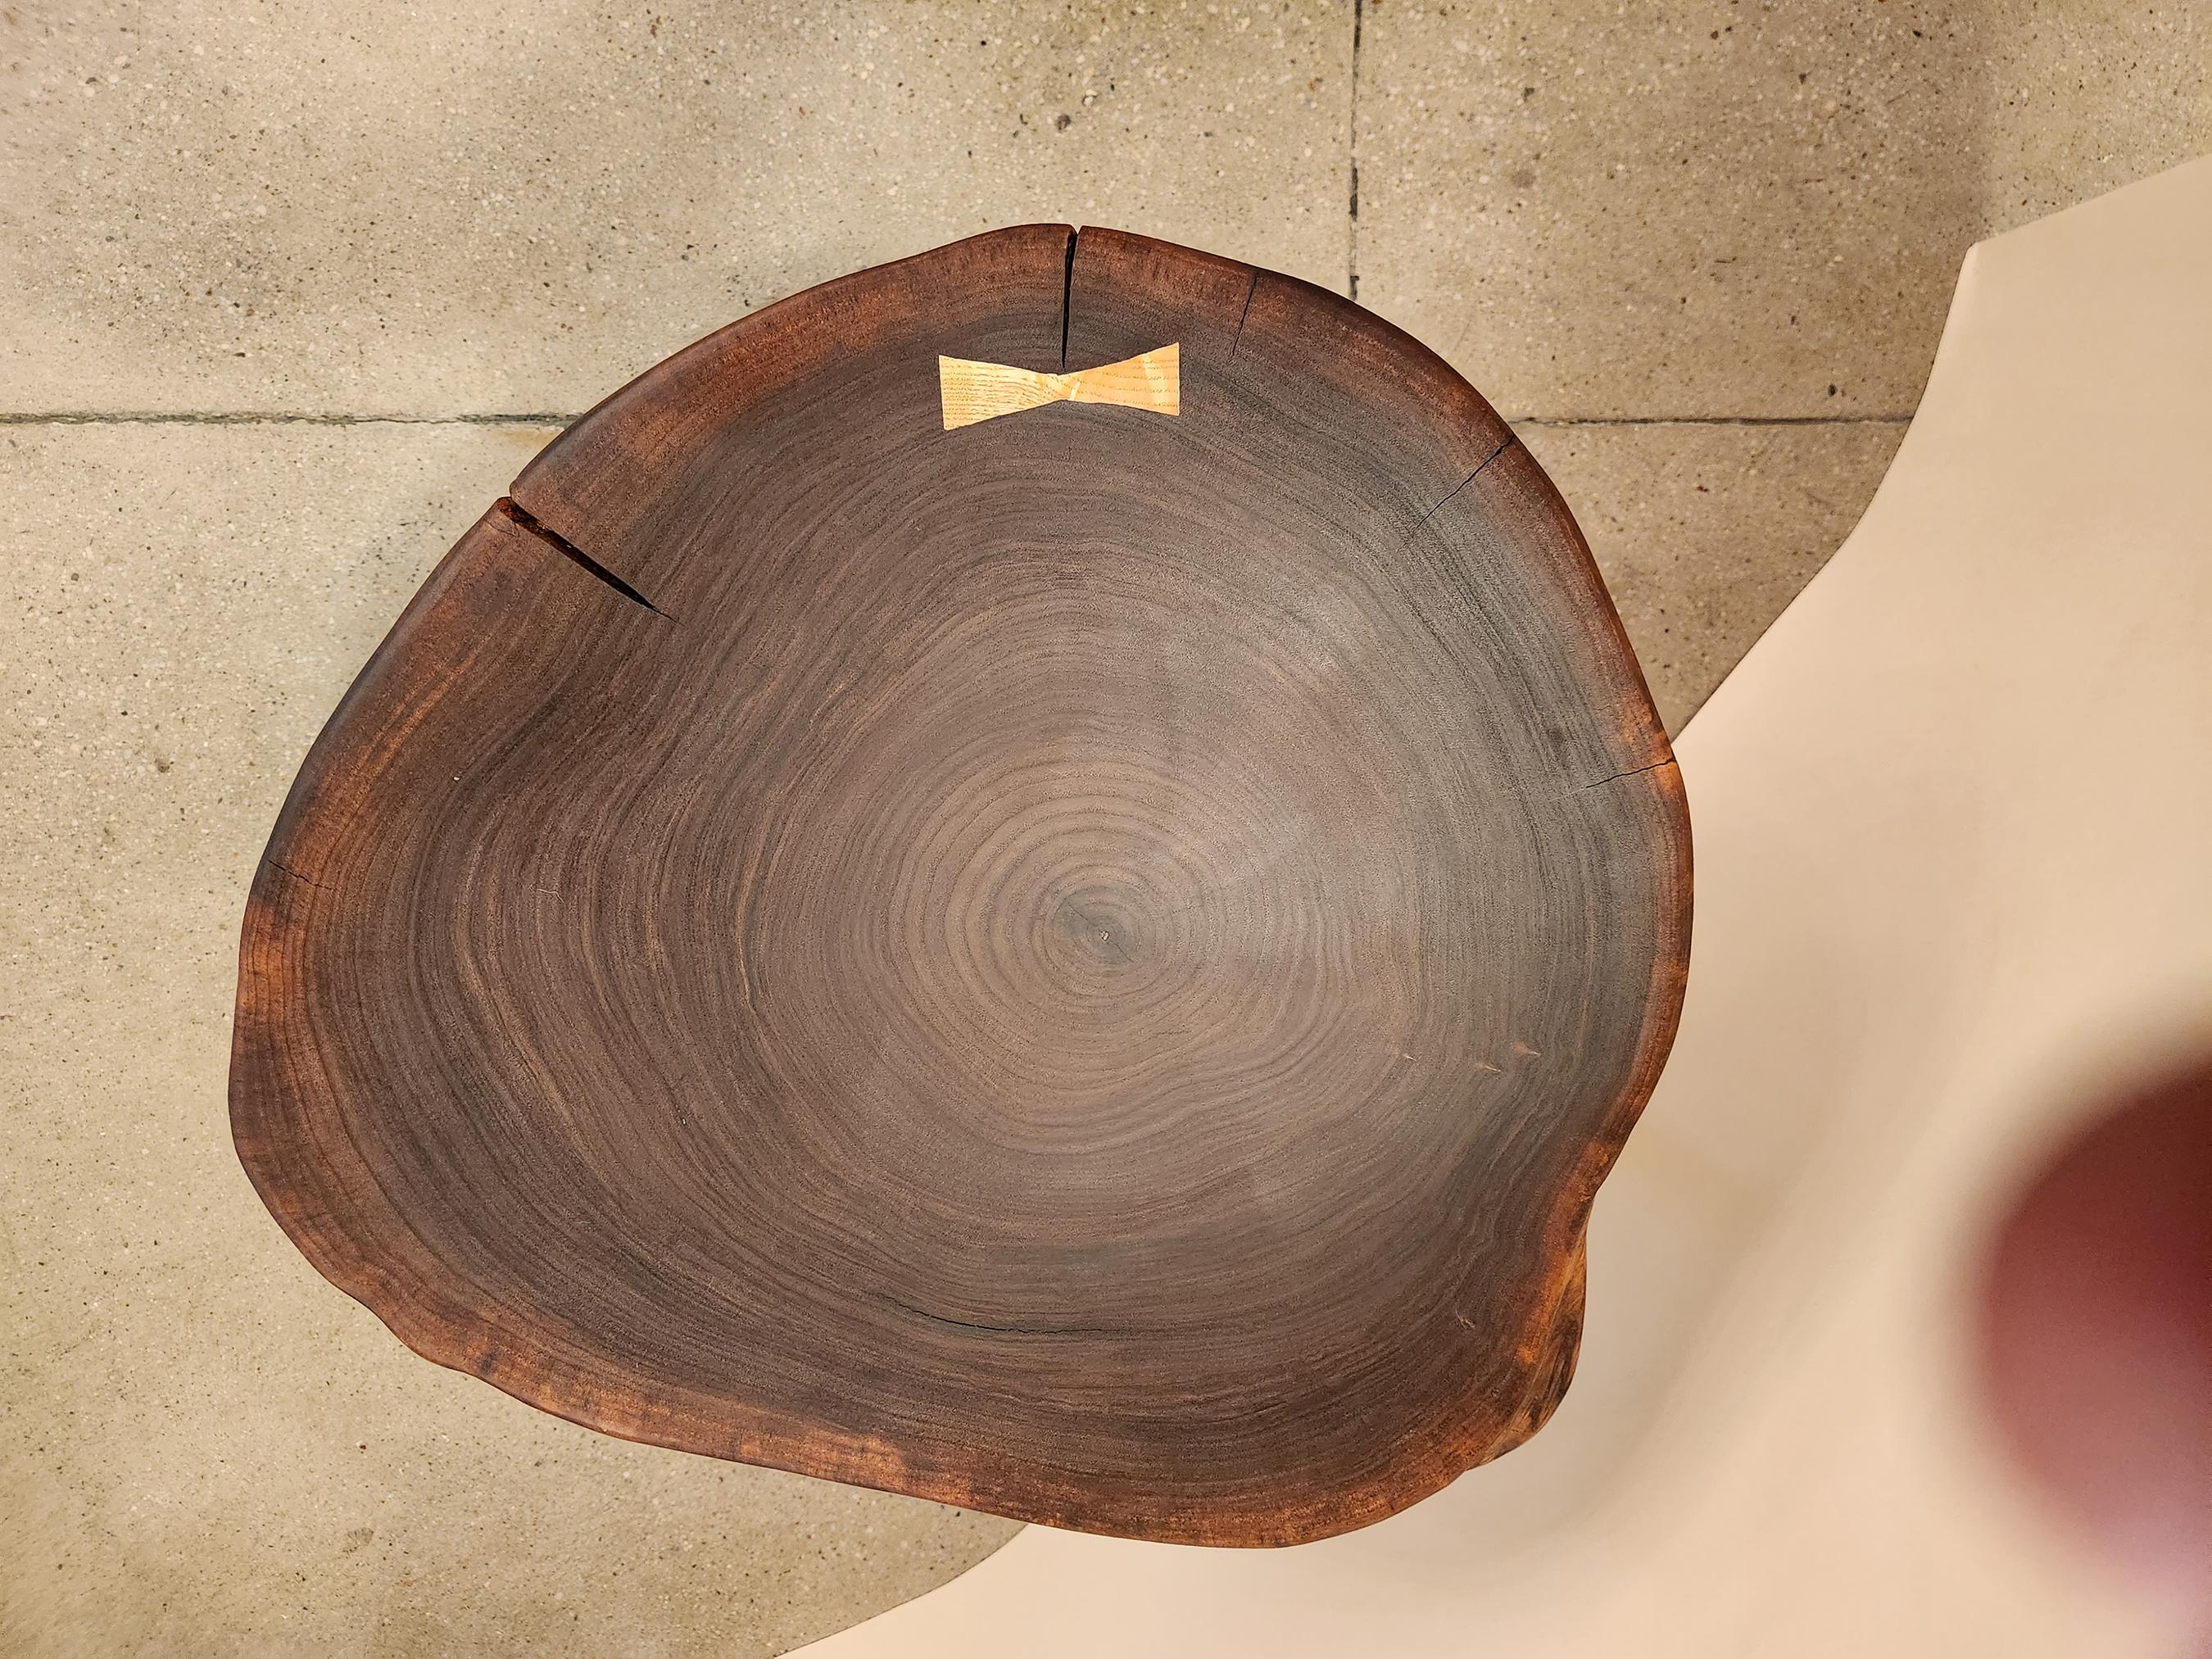 This cookie slab coffee table with a bow tie key is a perfect piece that is both functional and artisanal. It is made from walnut wood which is known for its strength, grain and color. The wood was polished to a smooth finish and coated with several